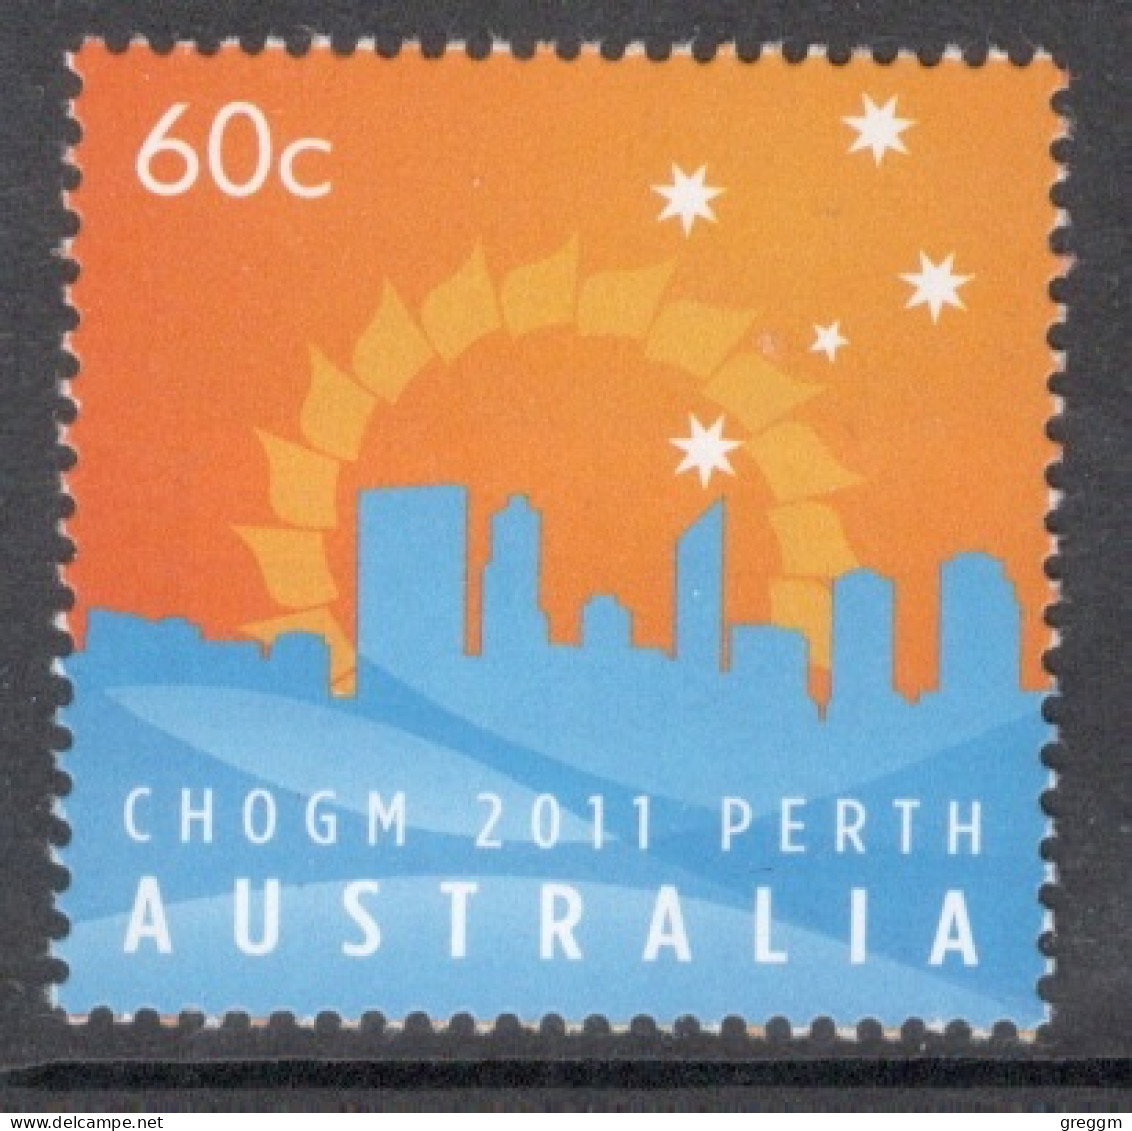 Australia 2011 Stamp Celebrating CHOGM 2011 - Perth In Unmounted Mint Condition. - Mint Stamps